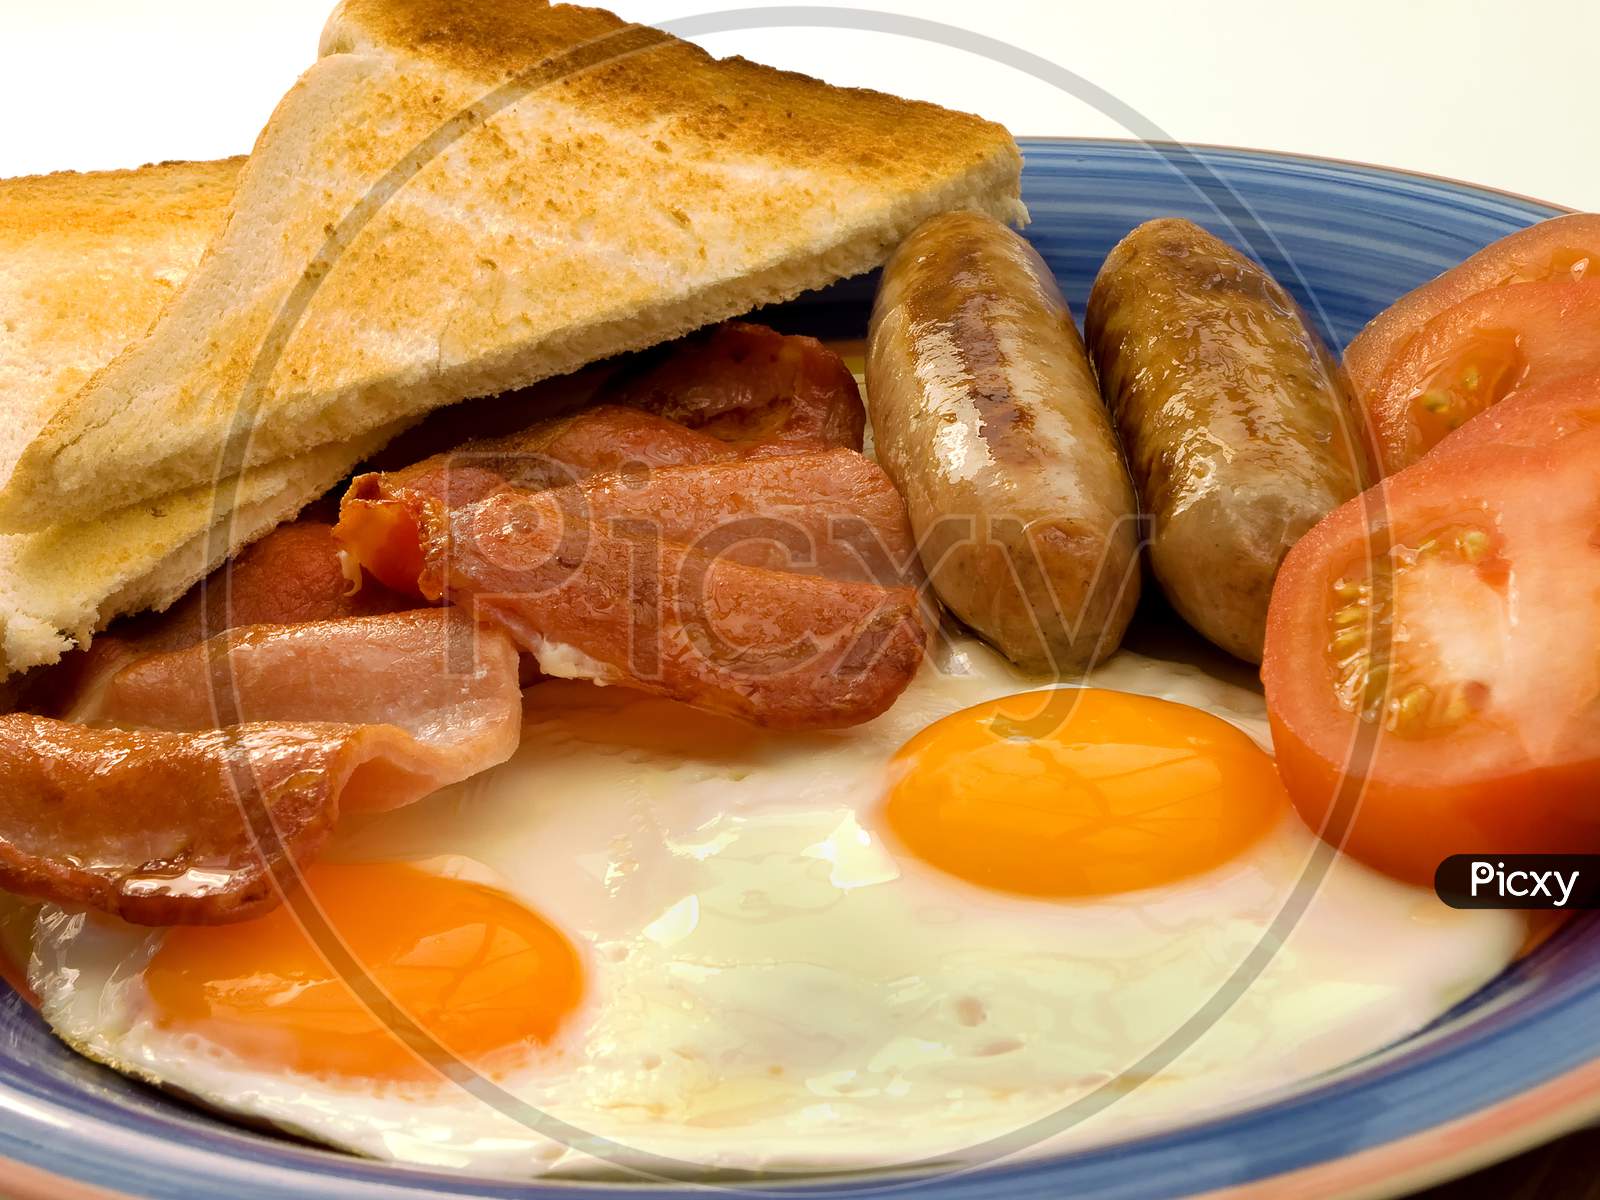 A traditional English breakfast